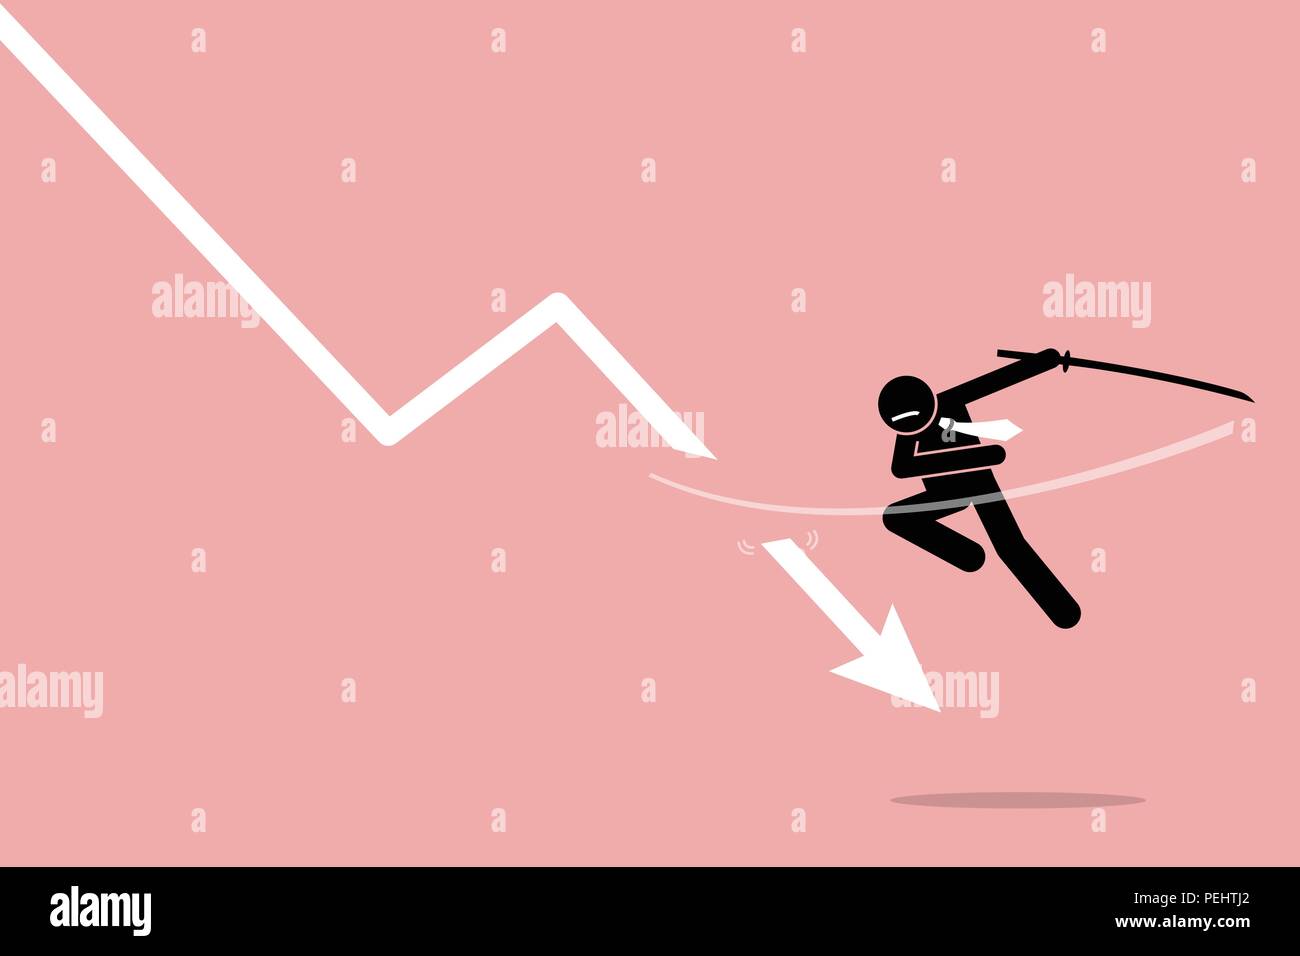 Vector artwork depicts stock market strategy by stopping losses Stock